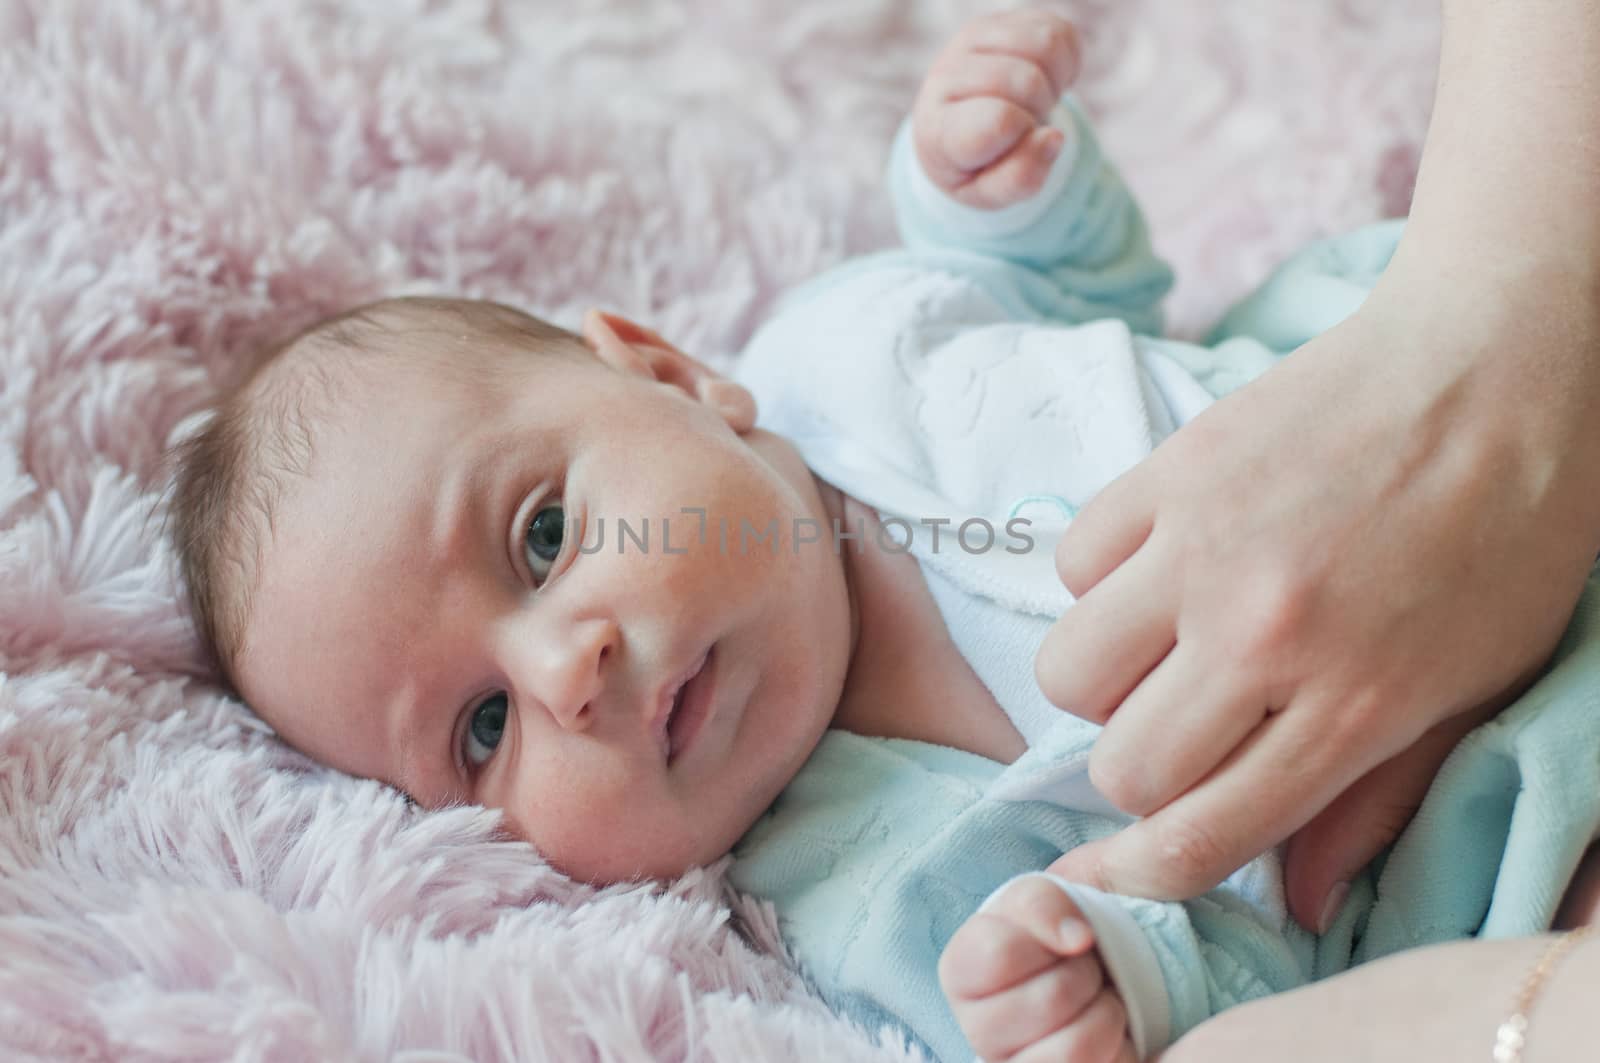 Little baby boy and hands by Linaga